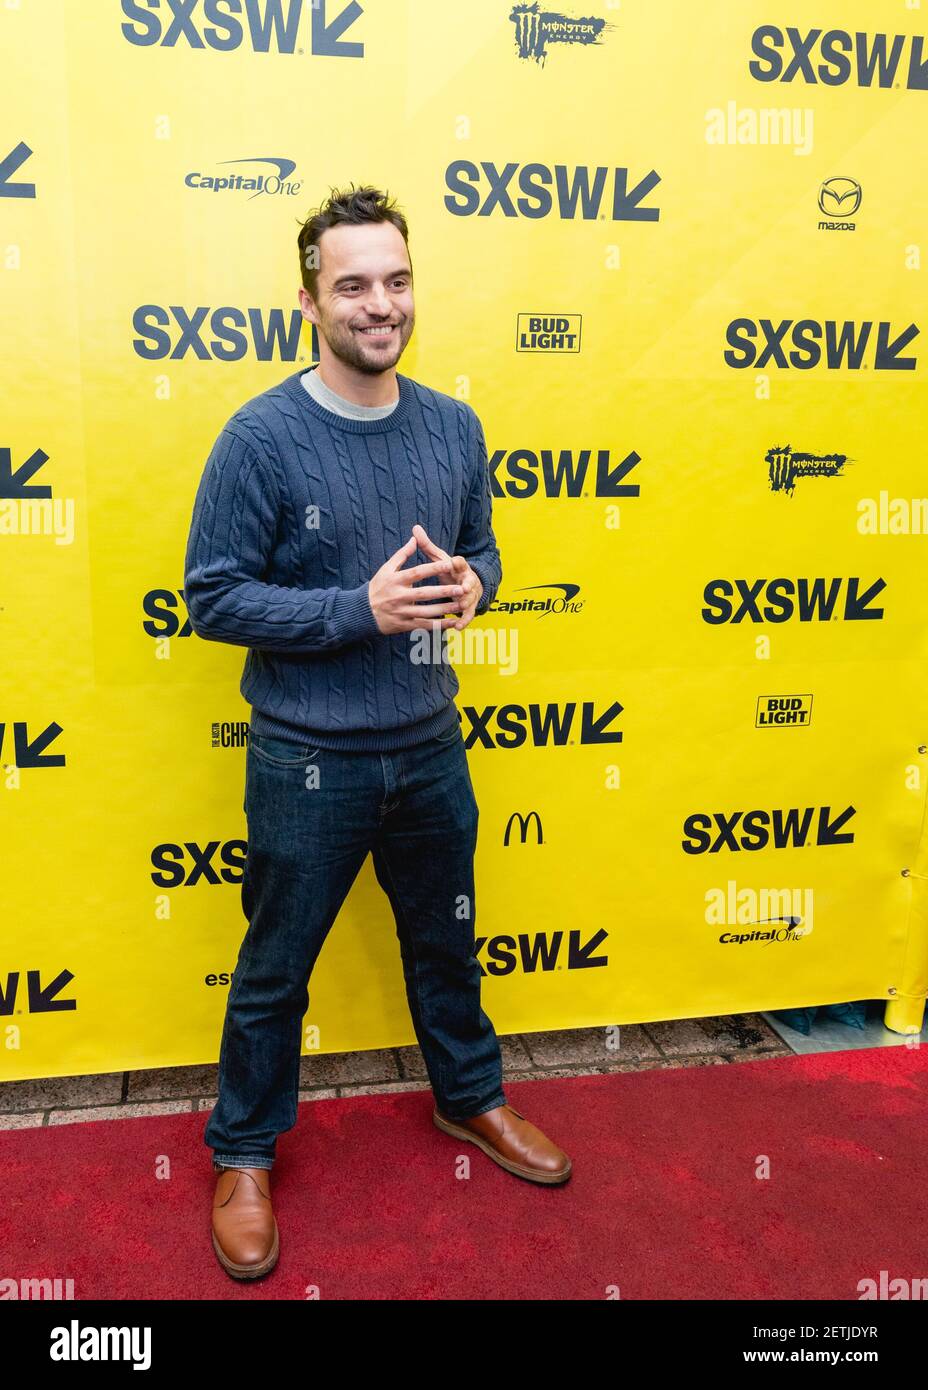 AUSTIN, TX - MARCH 11: Actor Jake Johnson attends the premiere of 'Win It  All' premiere 2017 SXSW Conference and Festivals on March 11, 2017 in  Austin, Texas. (Photo by Maggie Boyd) ***